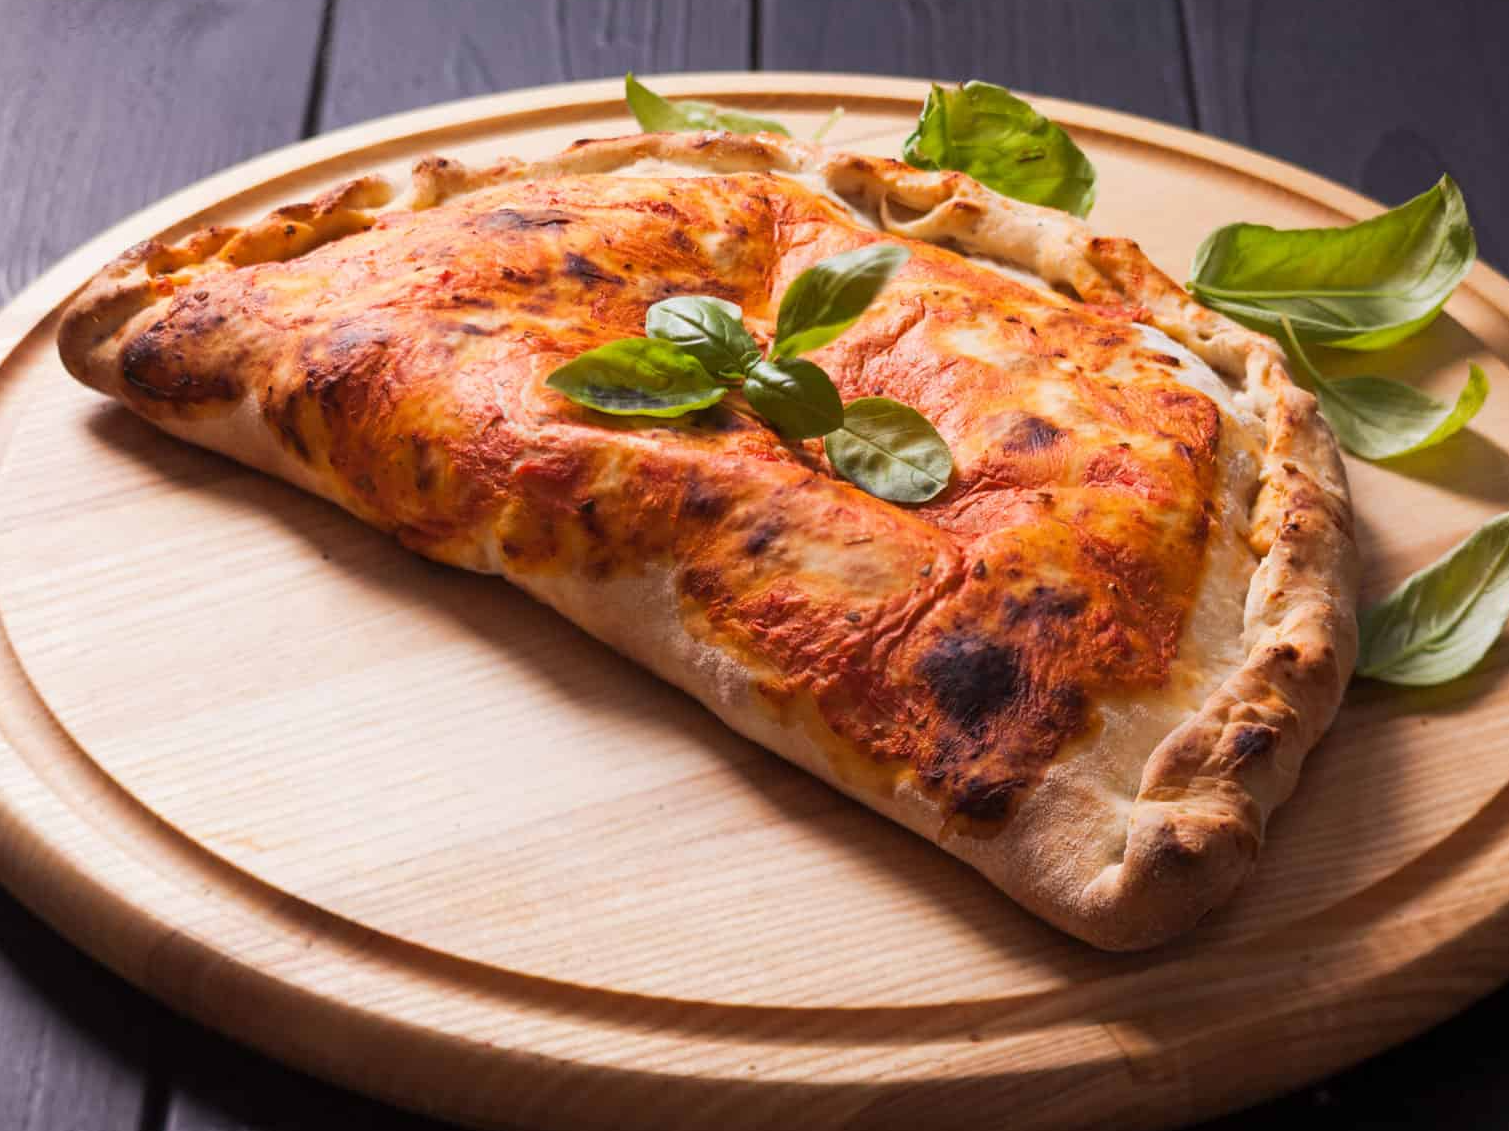 CALZONE BOLOGNES